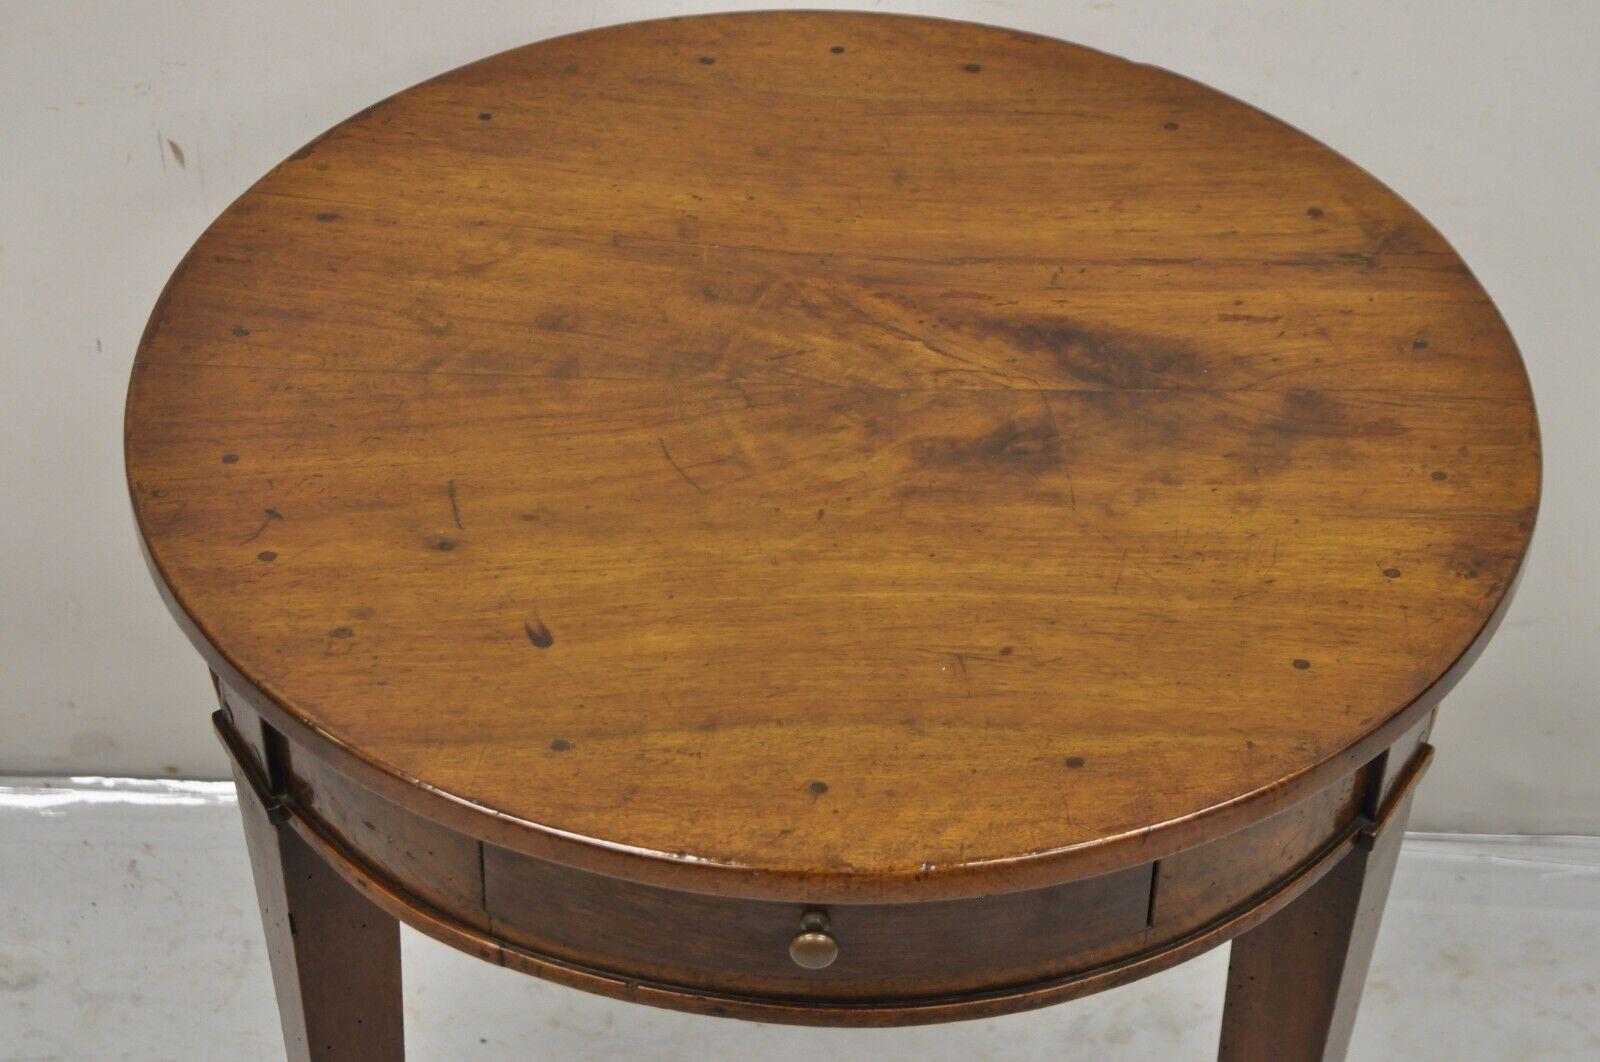 Antique 19th Century Italian Biedermeier Country Provincial Cherry Wood Single Drawer Round Accent Table. Item features a single dovetailed drawer, solid cherry wood construction, original antiqued/distressed finish, tripod tapered legs, very nice